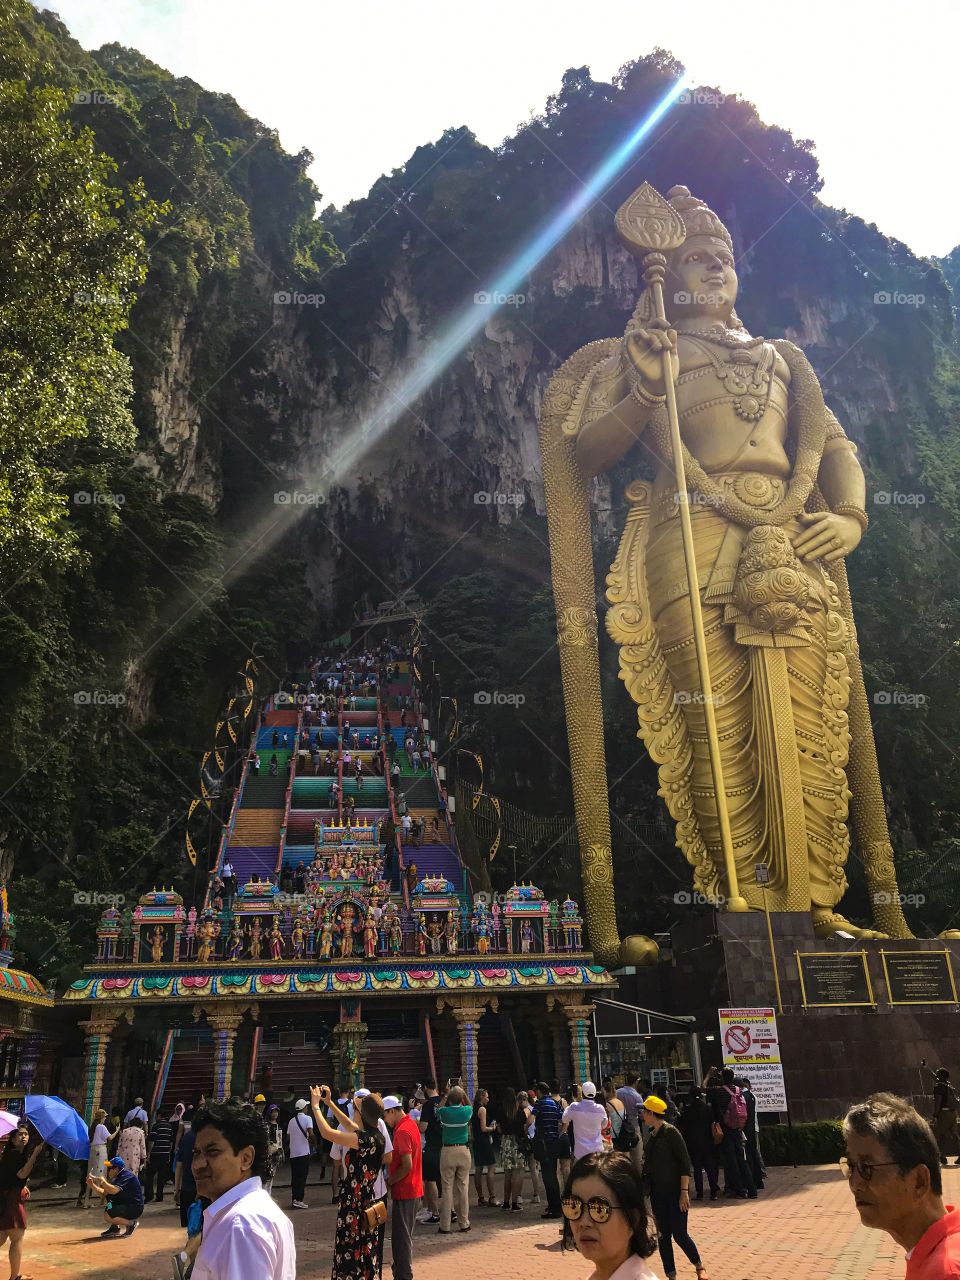 A monument that seems to have been built by the gods themselves in Malaysia.Both a natural and man-made wonder, this holy monument incorporates both the stunning features of Malaysia’s limestone mountains and religious sculptures of the Hindu faith.